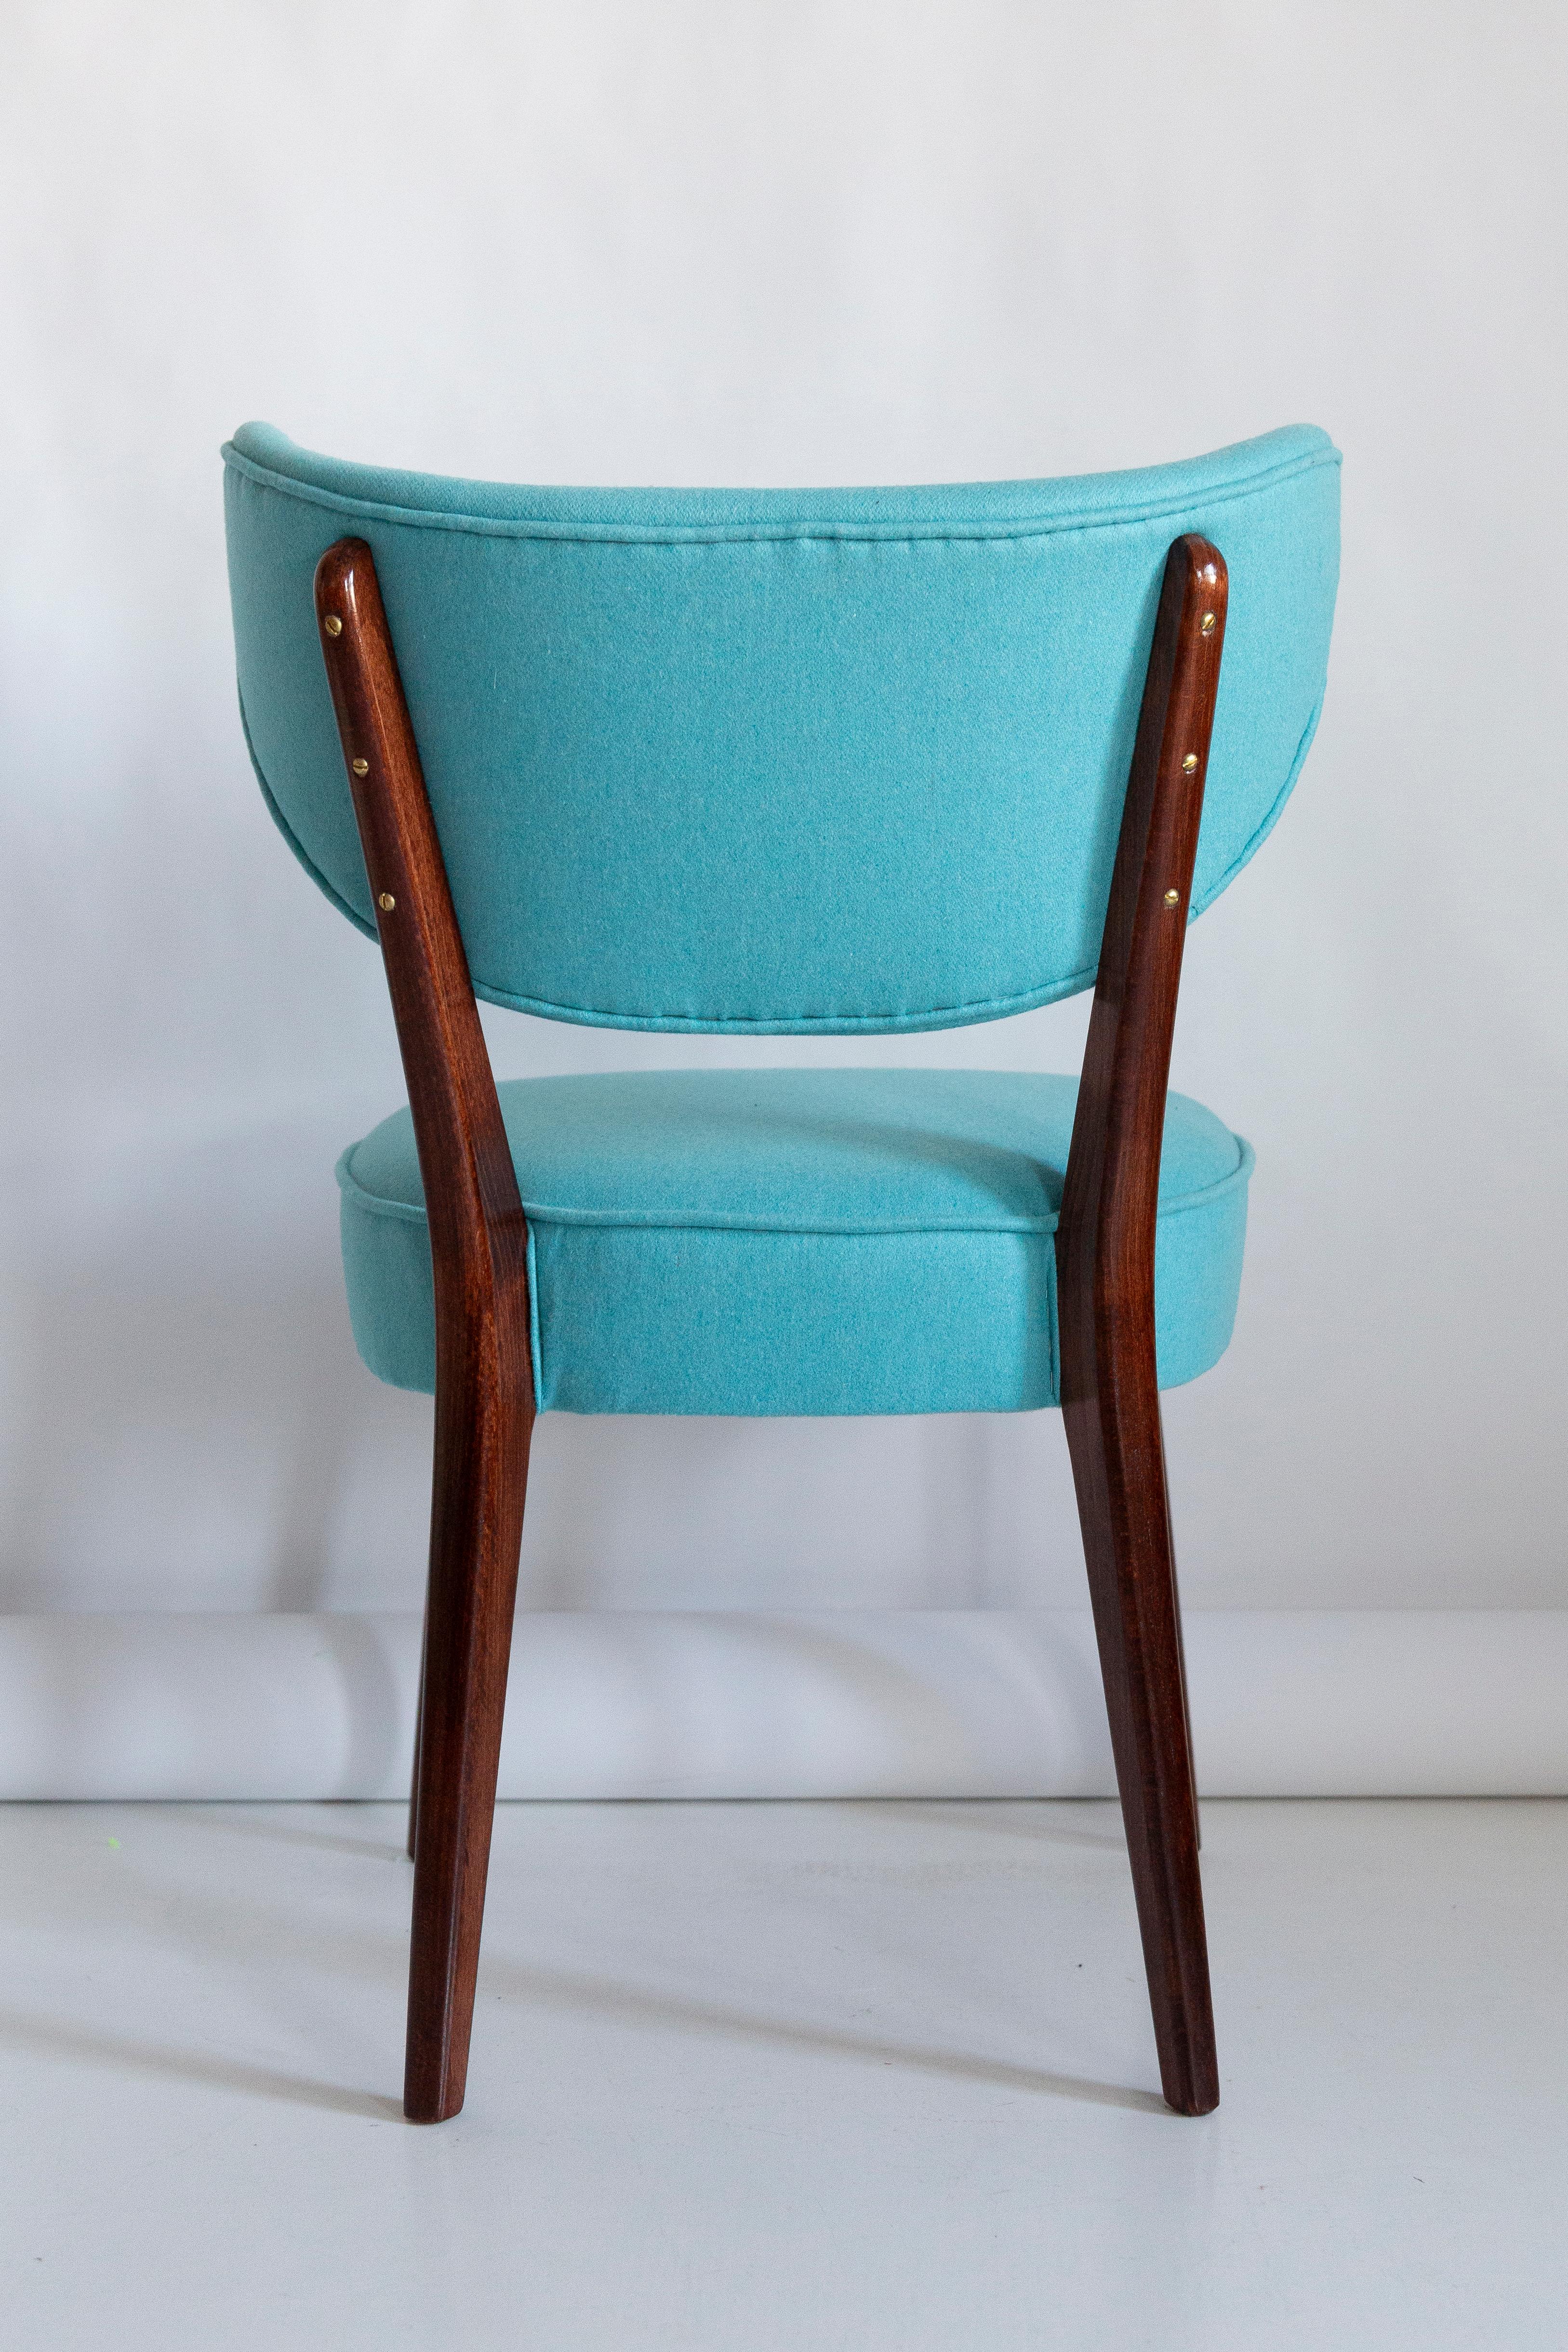 Bouclé Set of Ten Shell Dining Chairs, Turquoise Wool, by Vintola Studio, Europe. For Sale